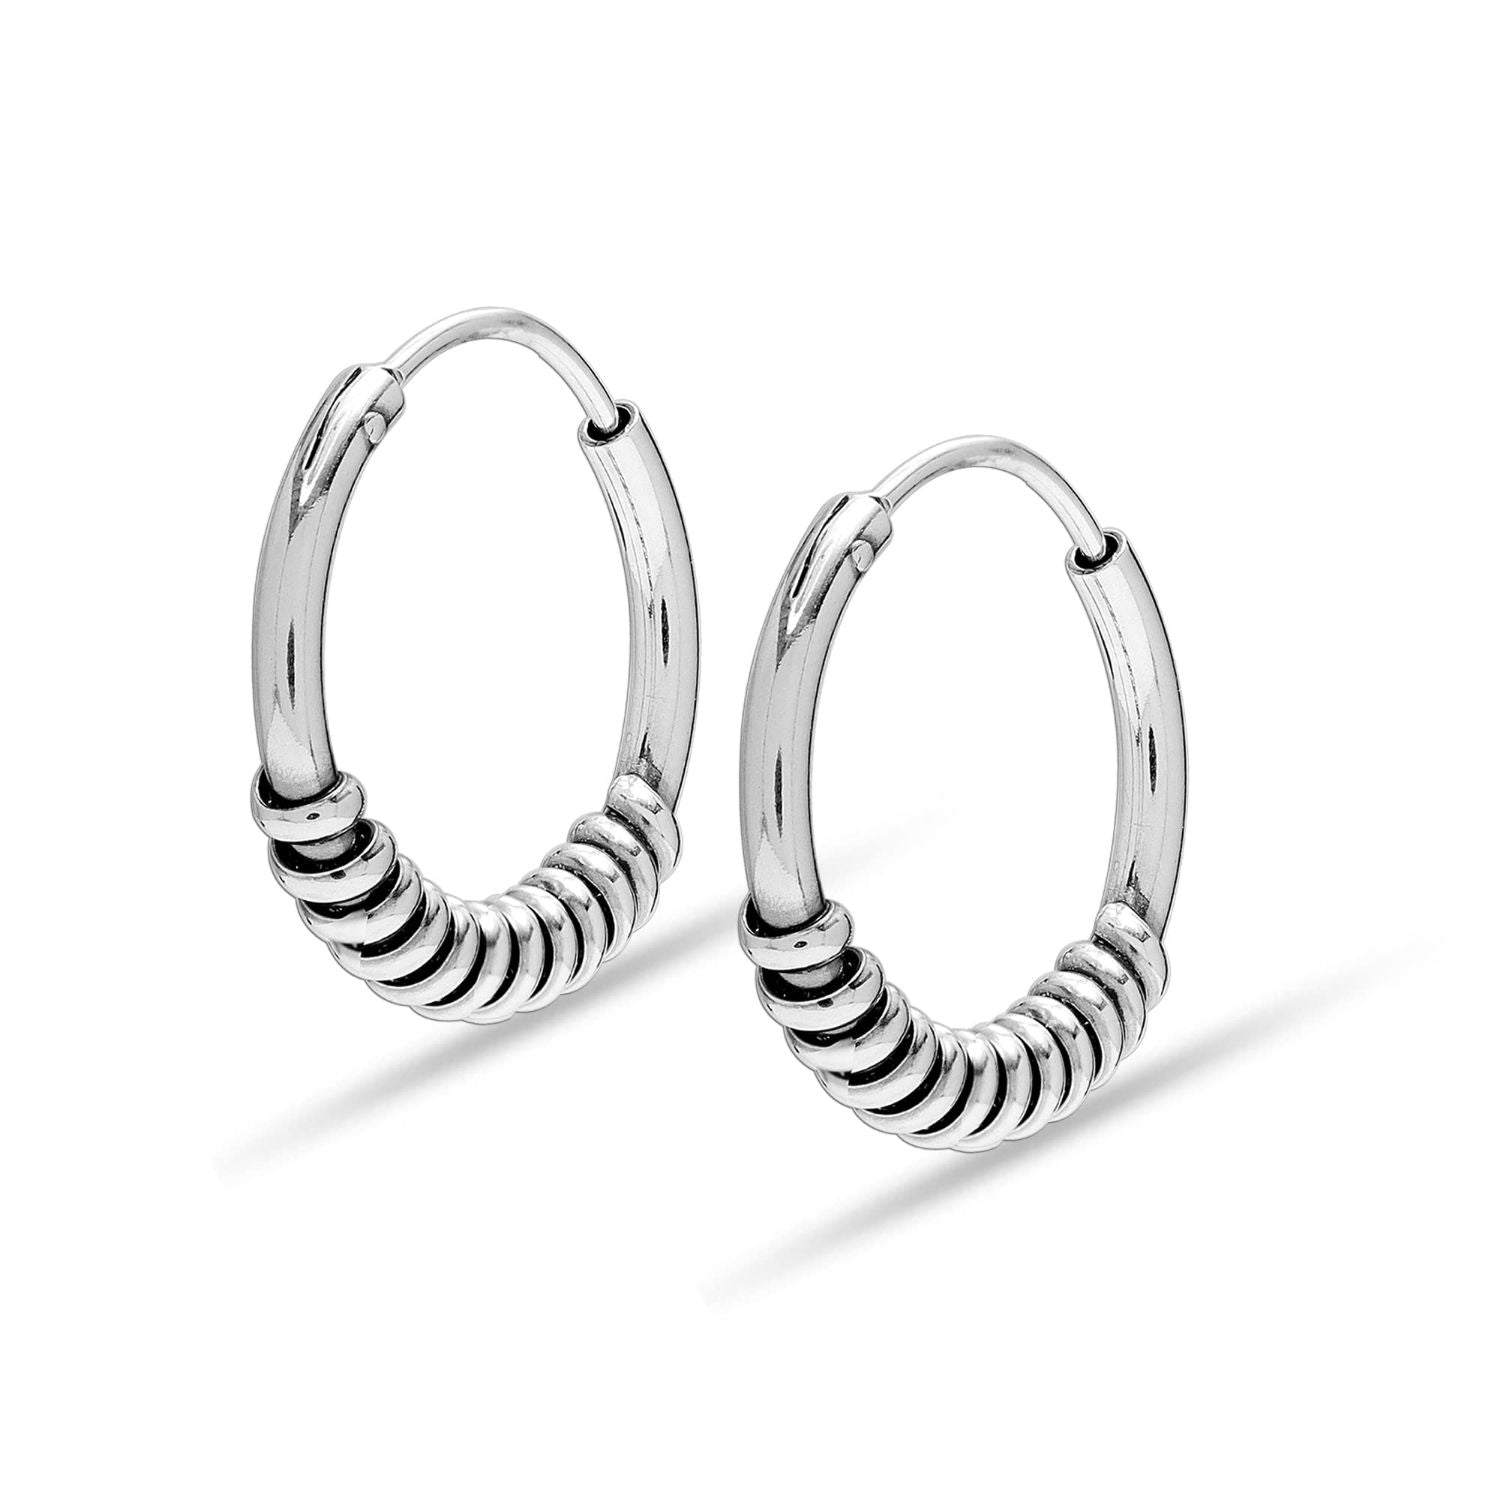 925 Sterling Silver Small Round Antique Balinese Endless Hoop Earrings for Women Teen